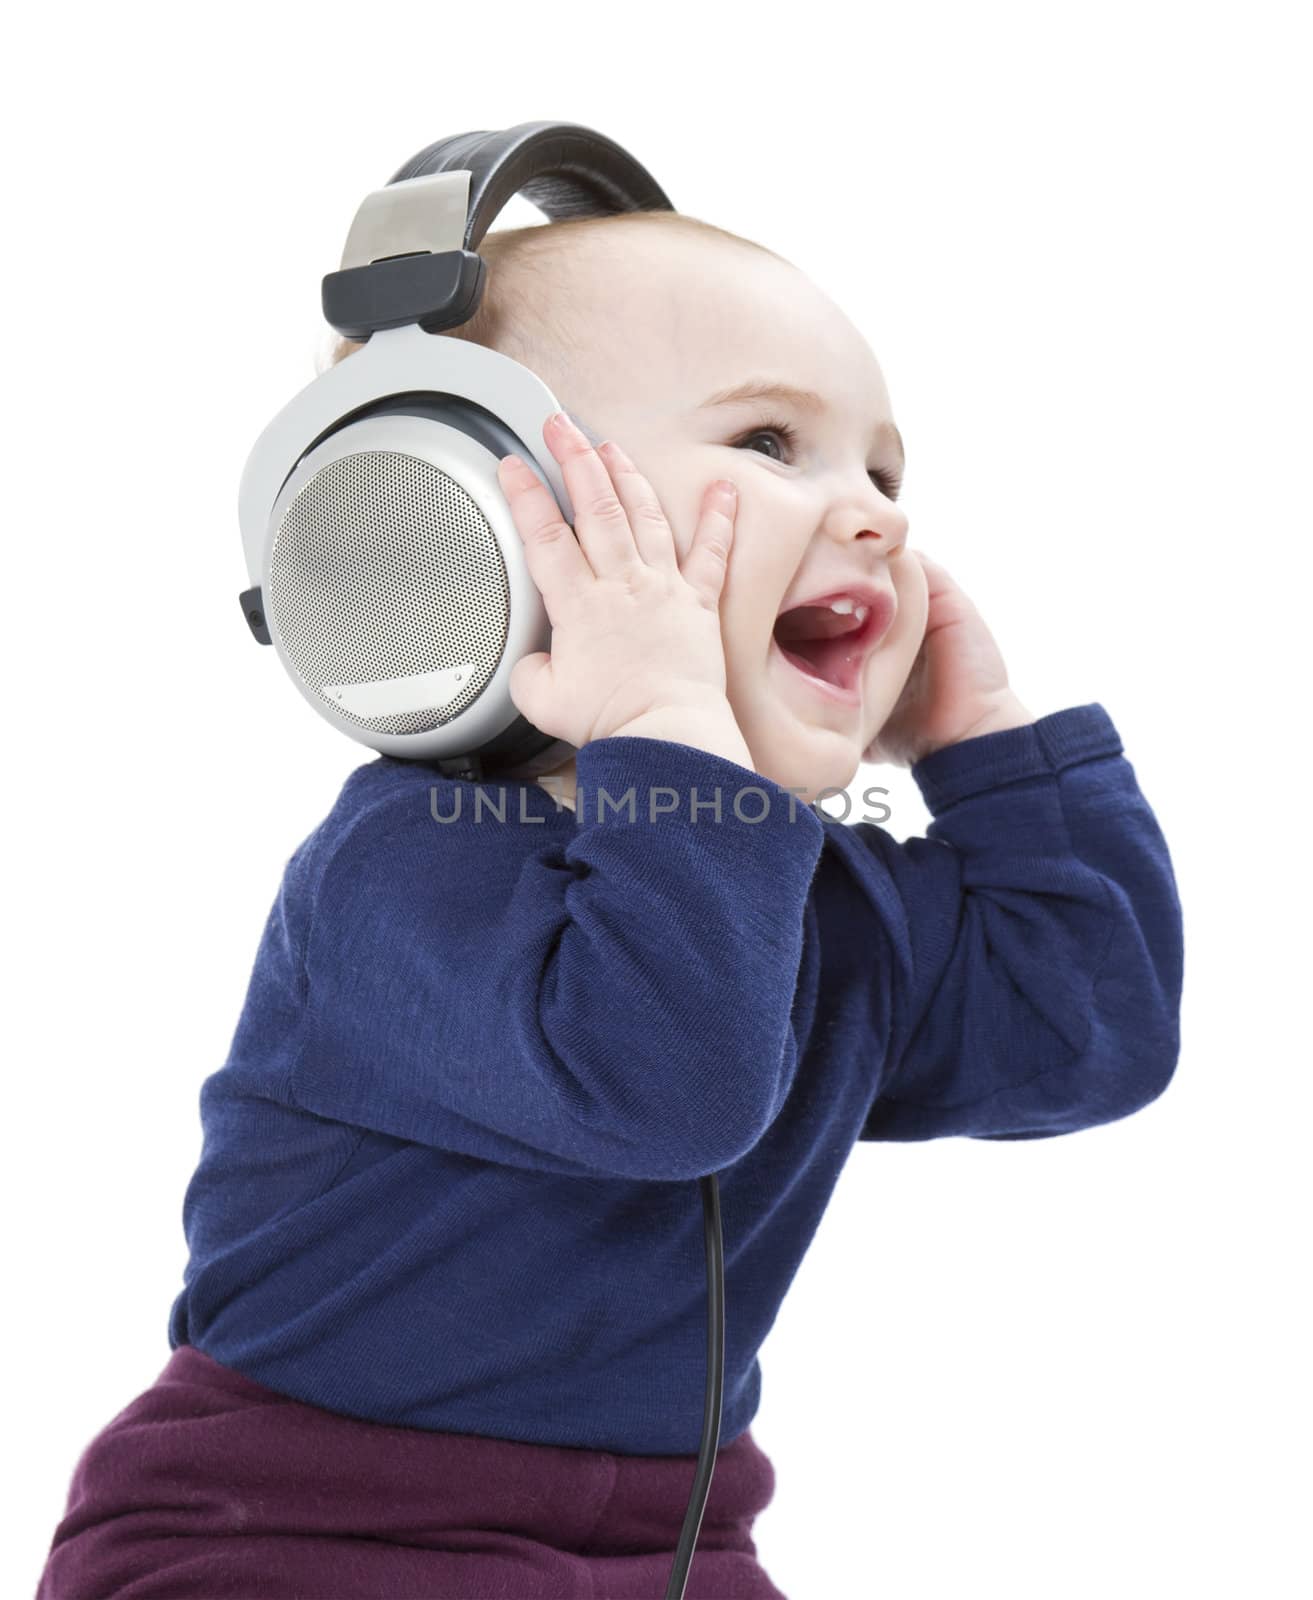 young laughing child with ear-phones listening to music by gewoldi